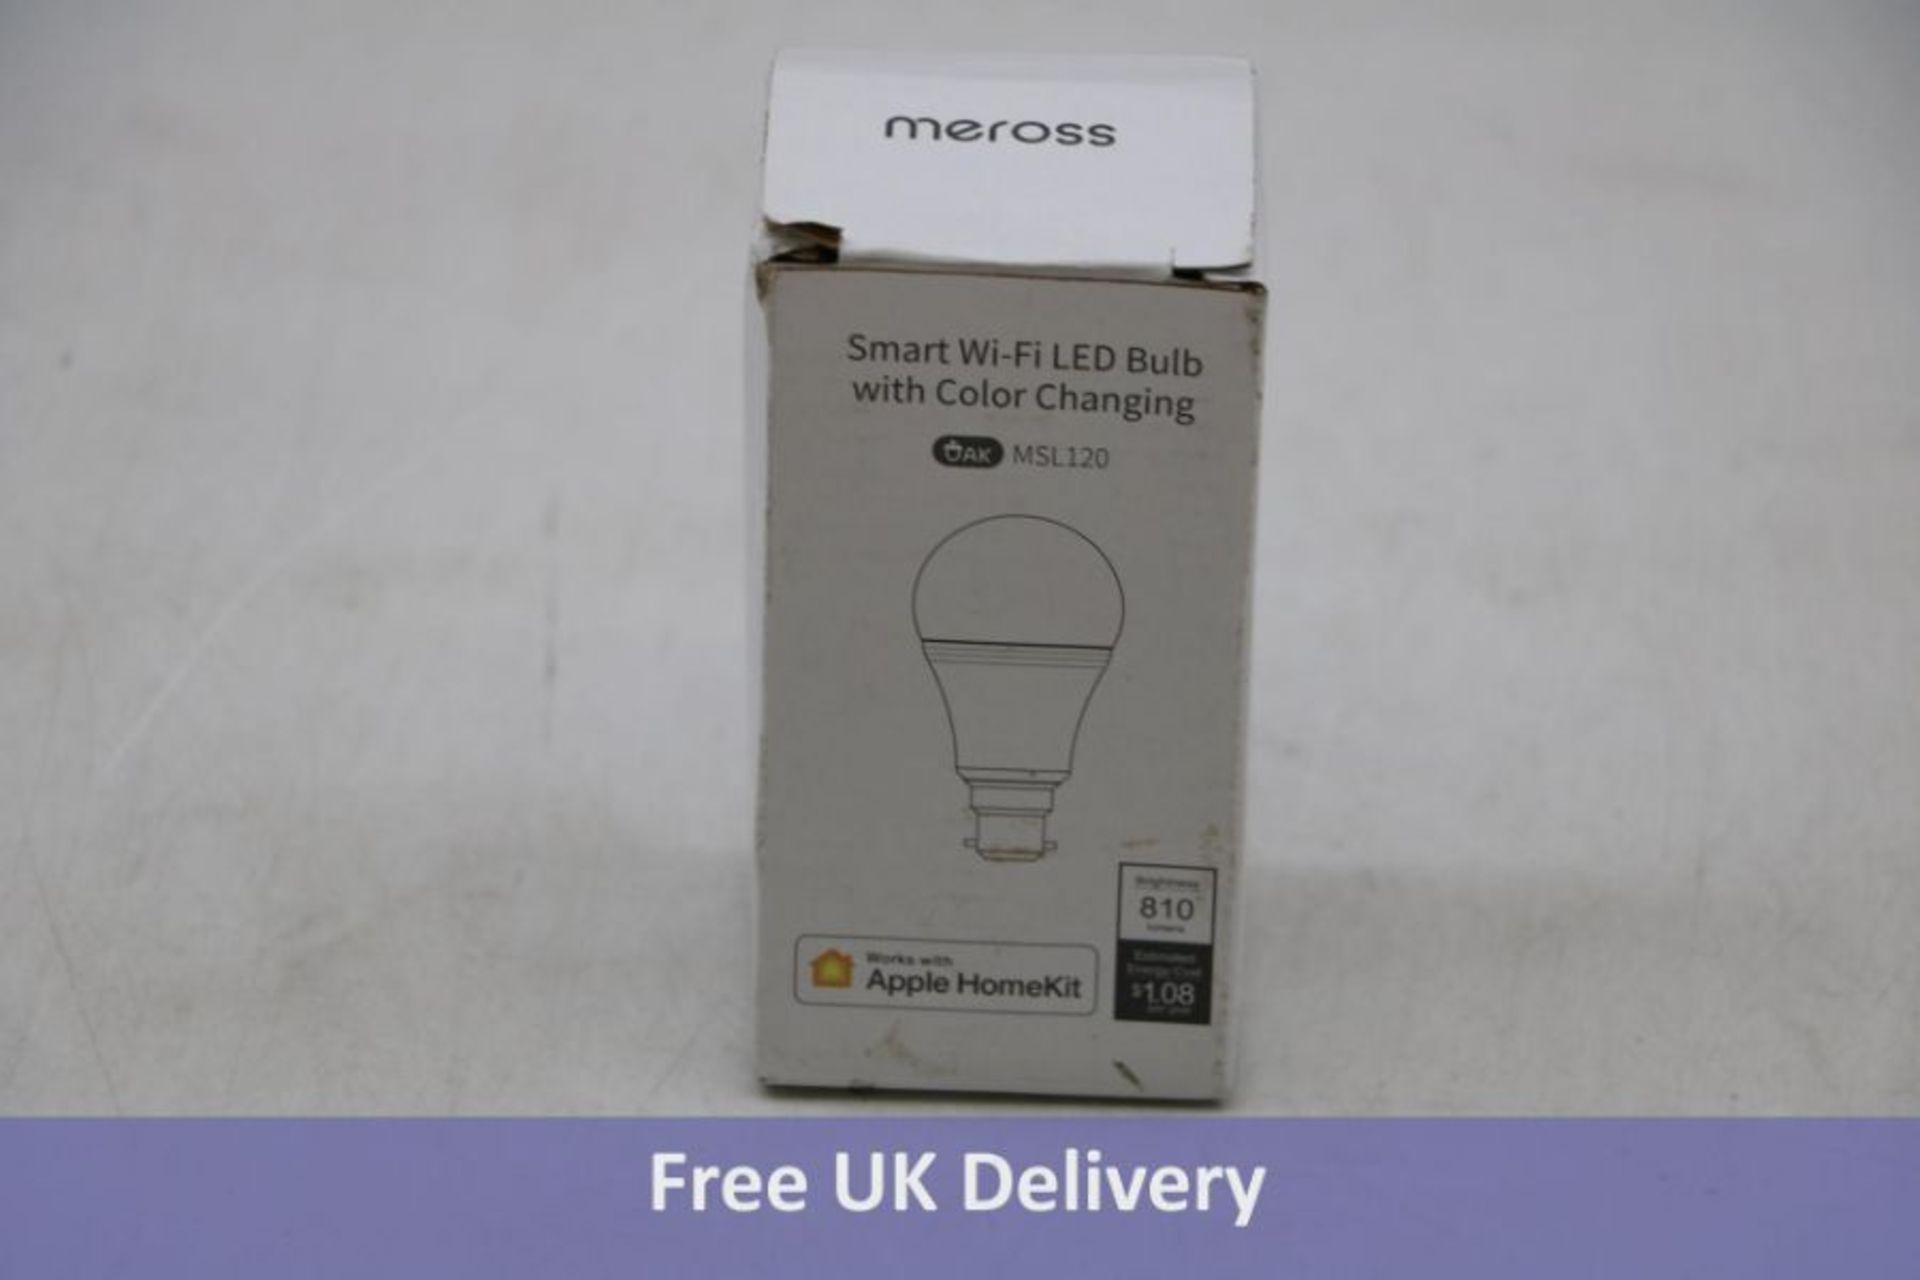 Sixteen Meross Smart Wi Fi LED Bulbs With Colour Changing, 810 Lumens, works With Apple Home Kit - Image 2 of 4